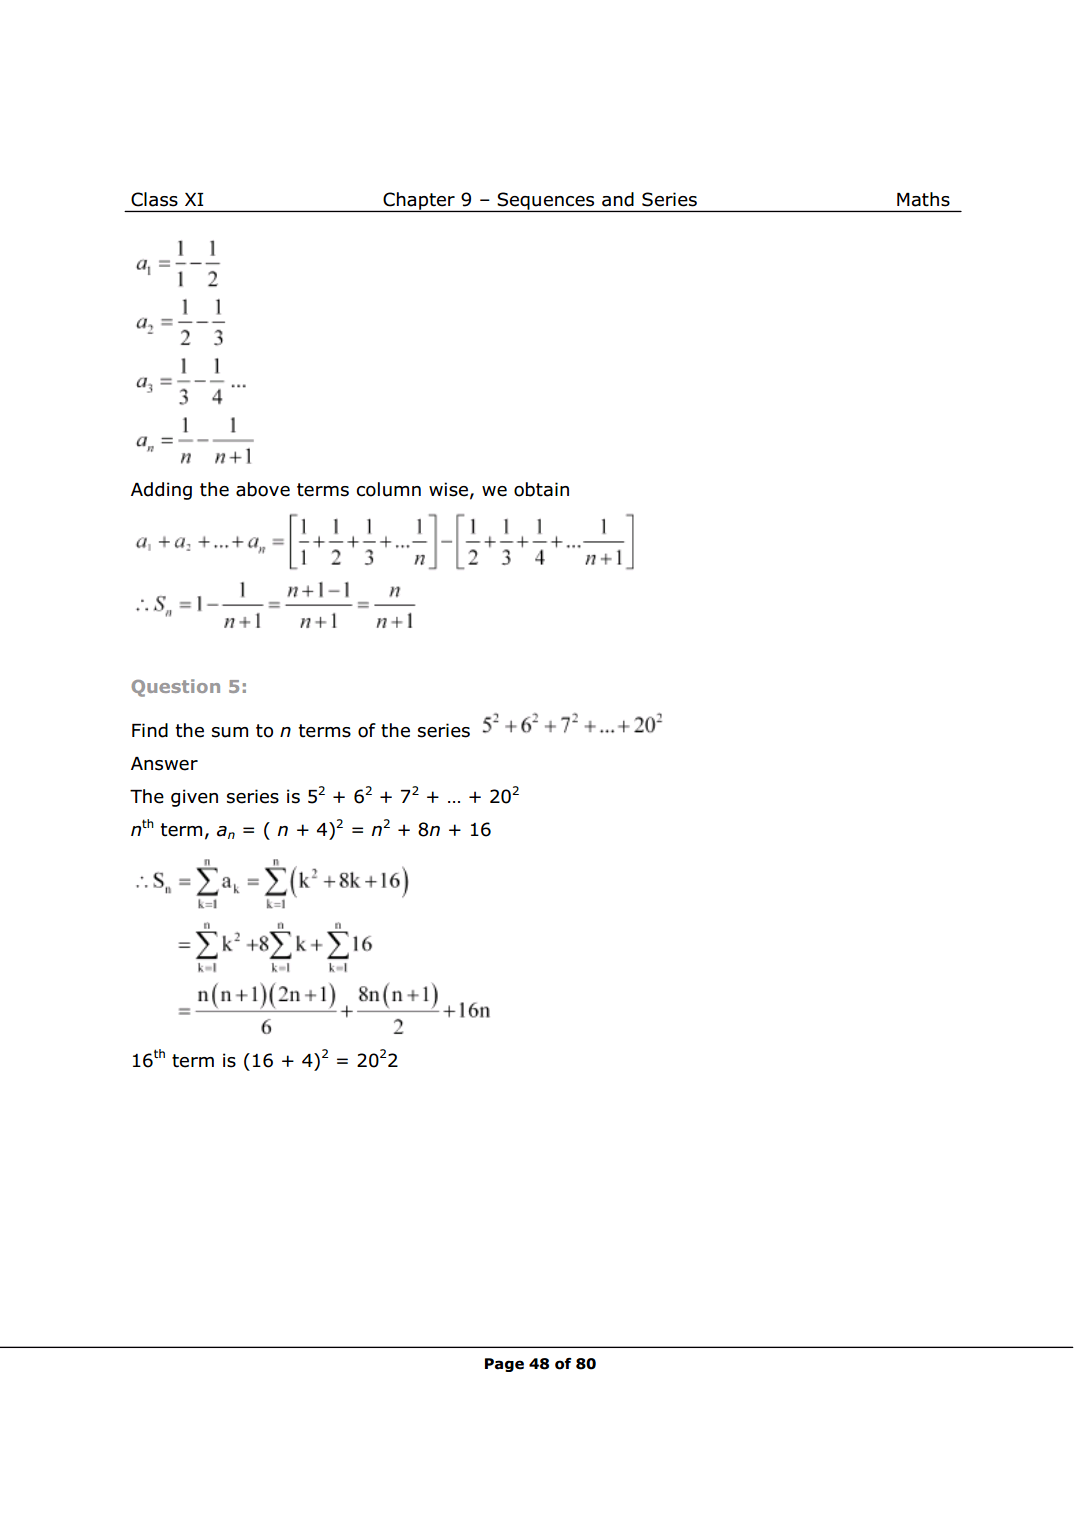 solutions image 4